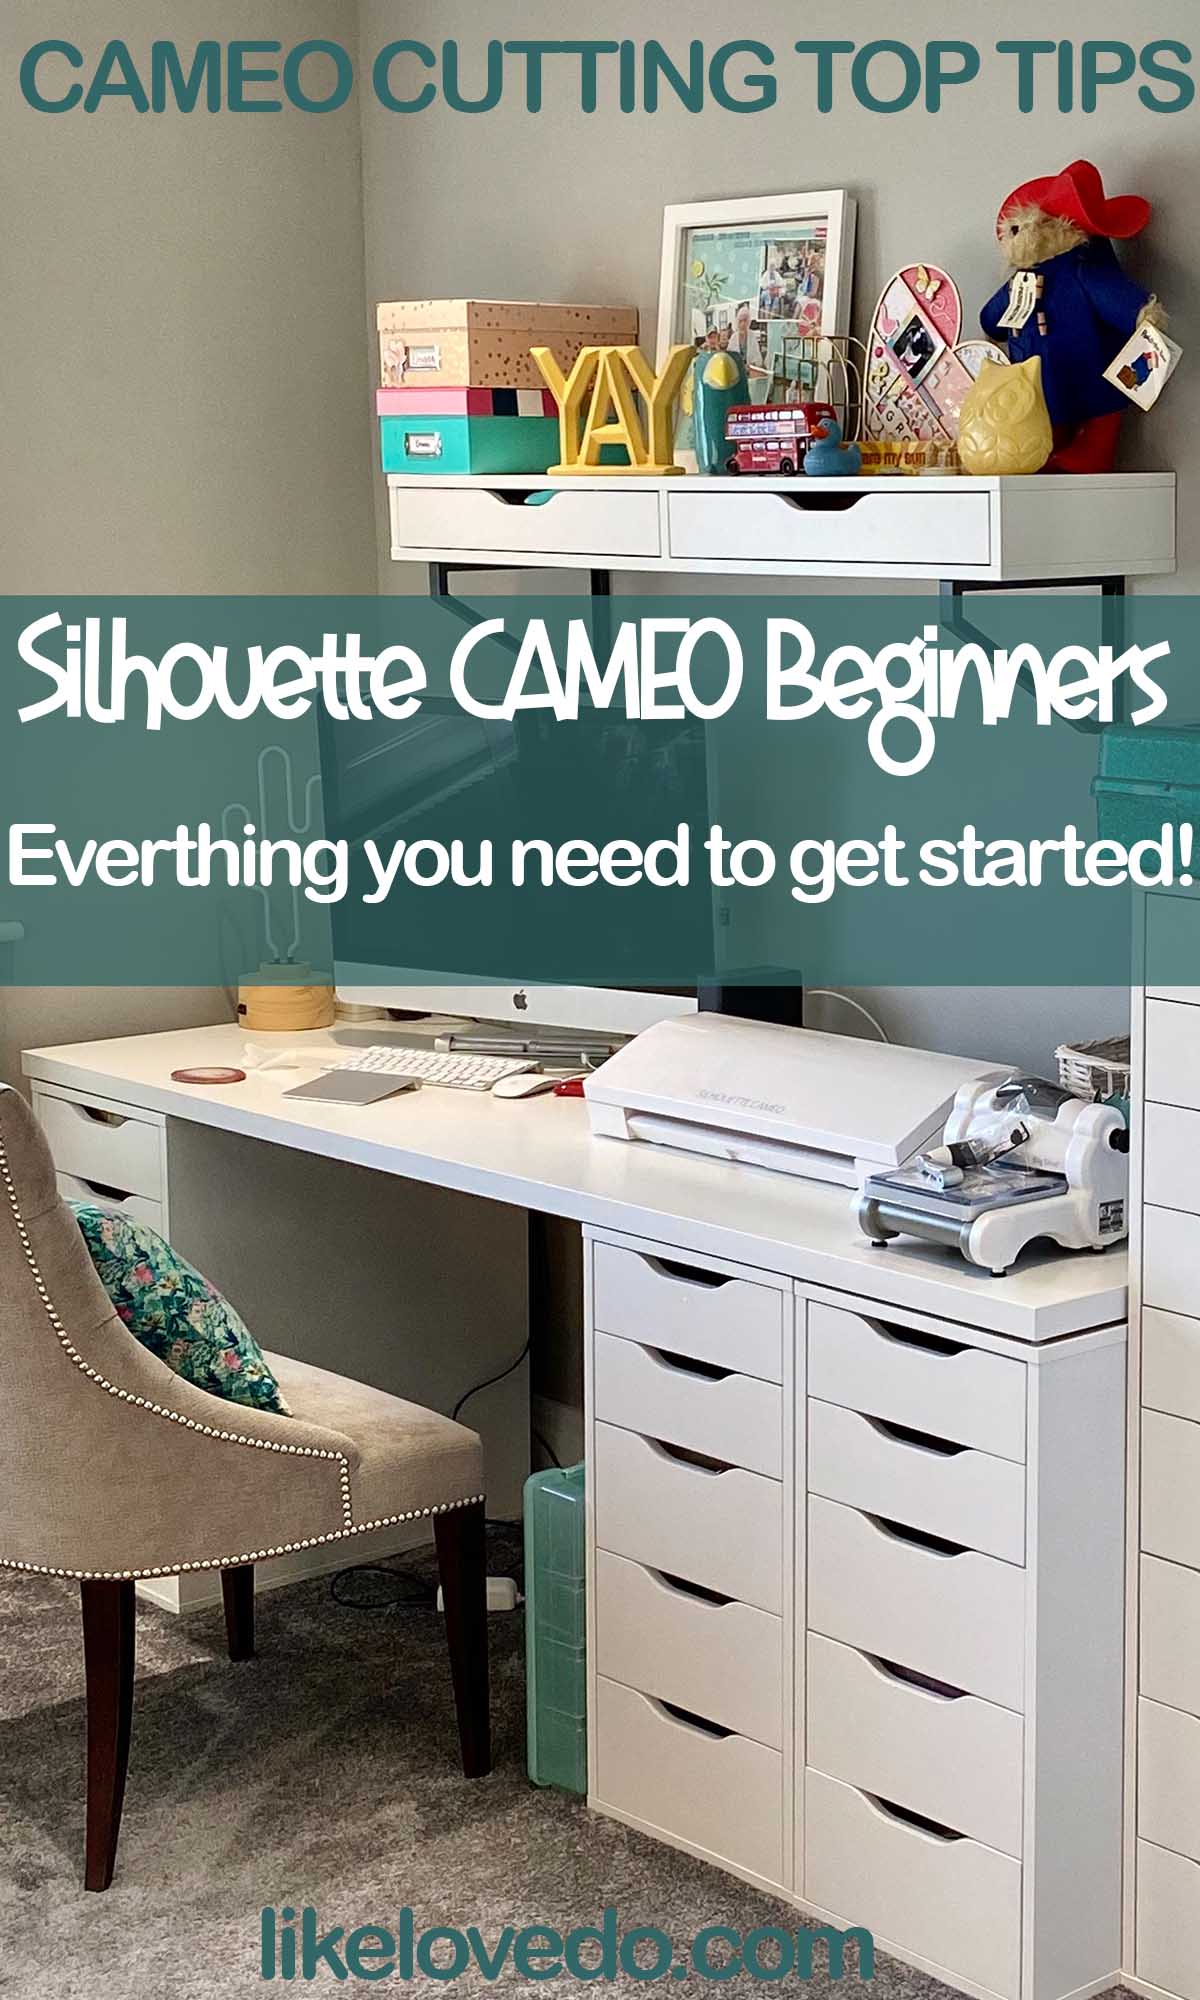 Silhouette Cameo Beginners guide everthing you need to get started cutting right away. Top tips for your Cameo 4